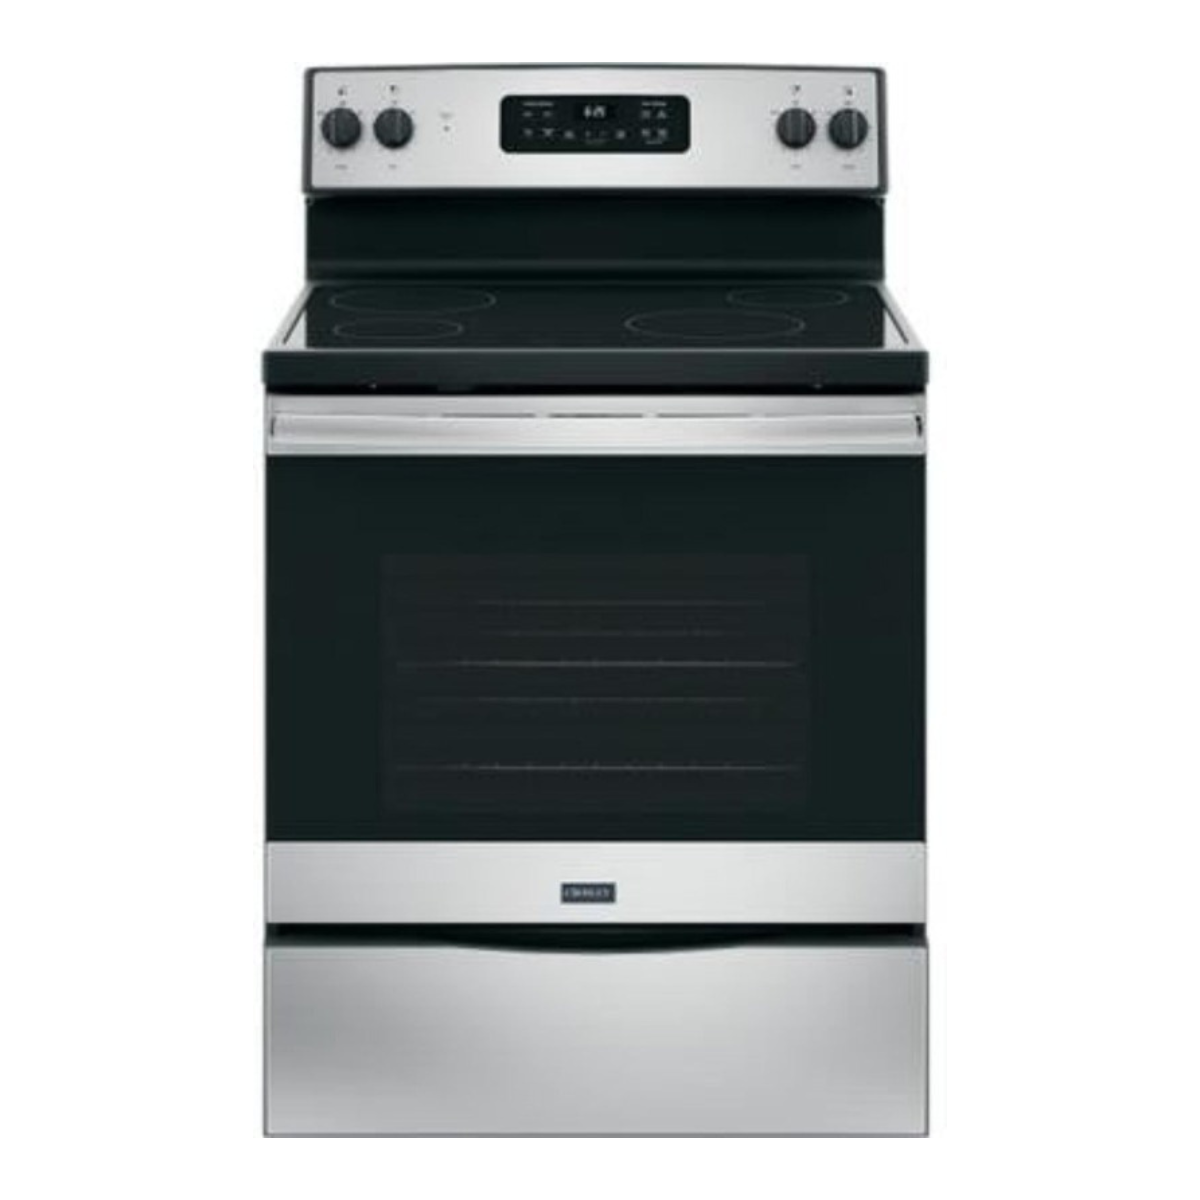 Crosley Smooth Top Stainless Steel Electric Range 5.3 cu. ft. (self clean) XB625RKSS $765.00 90 Days Same as Cash*